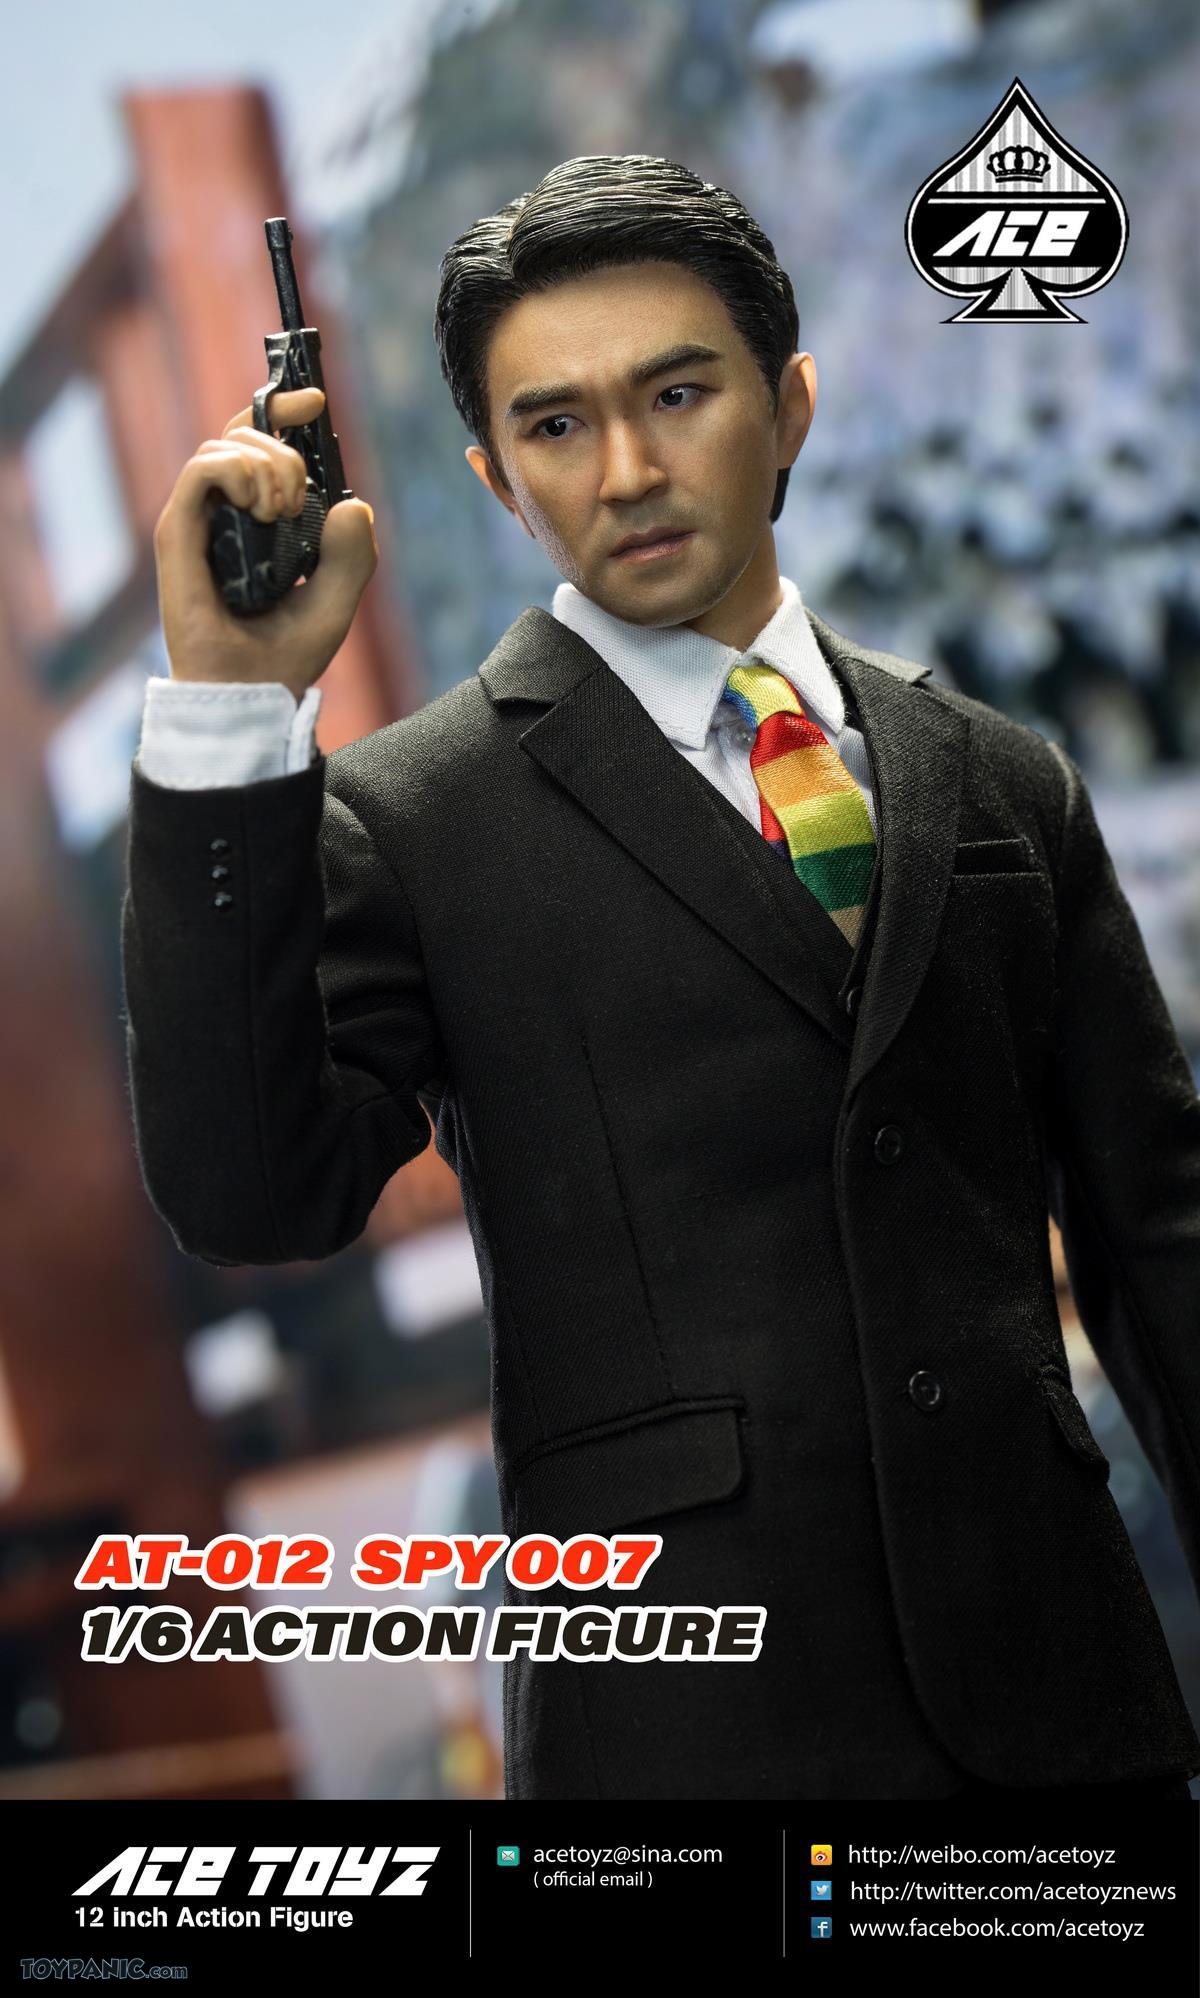 NEW PRODUCT: 1/6 scale Spy 007 Action Figure from Acetoyz  3011202210229AM_6864917